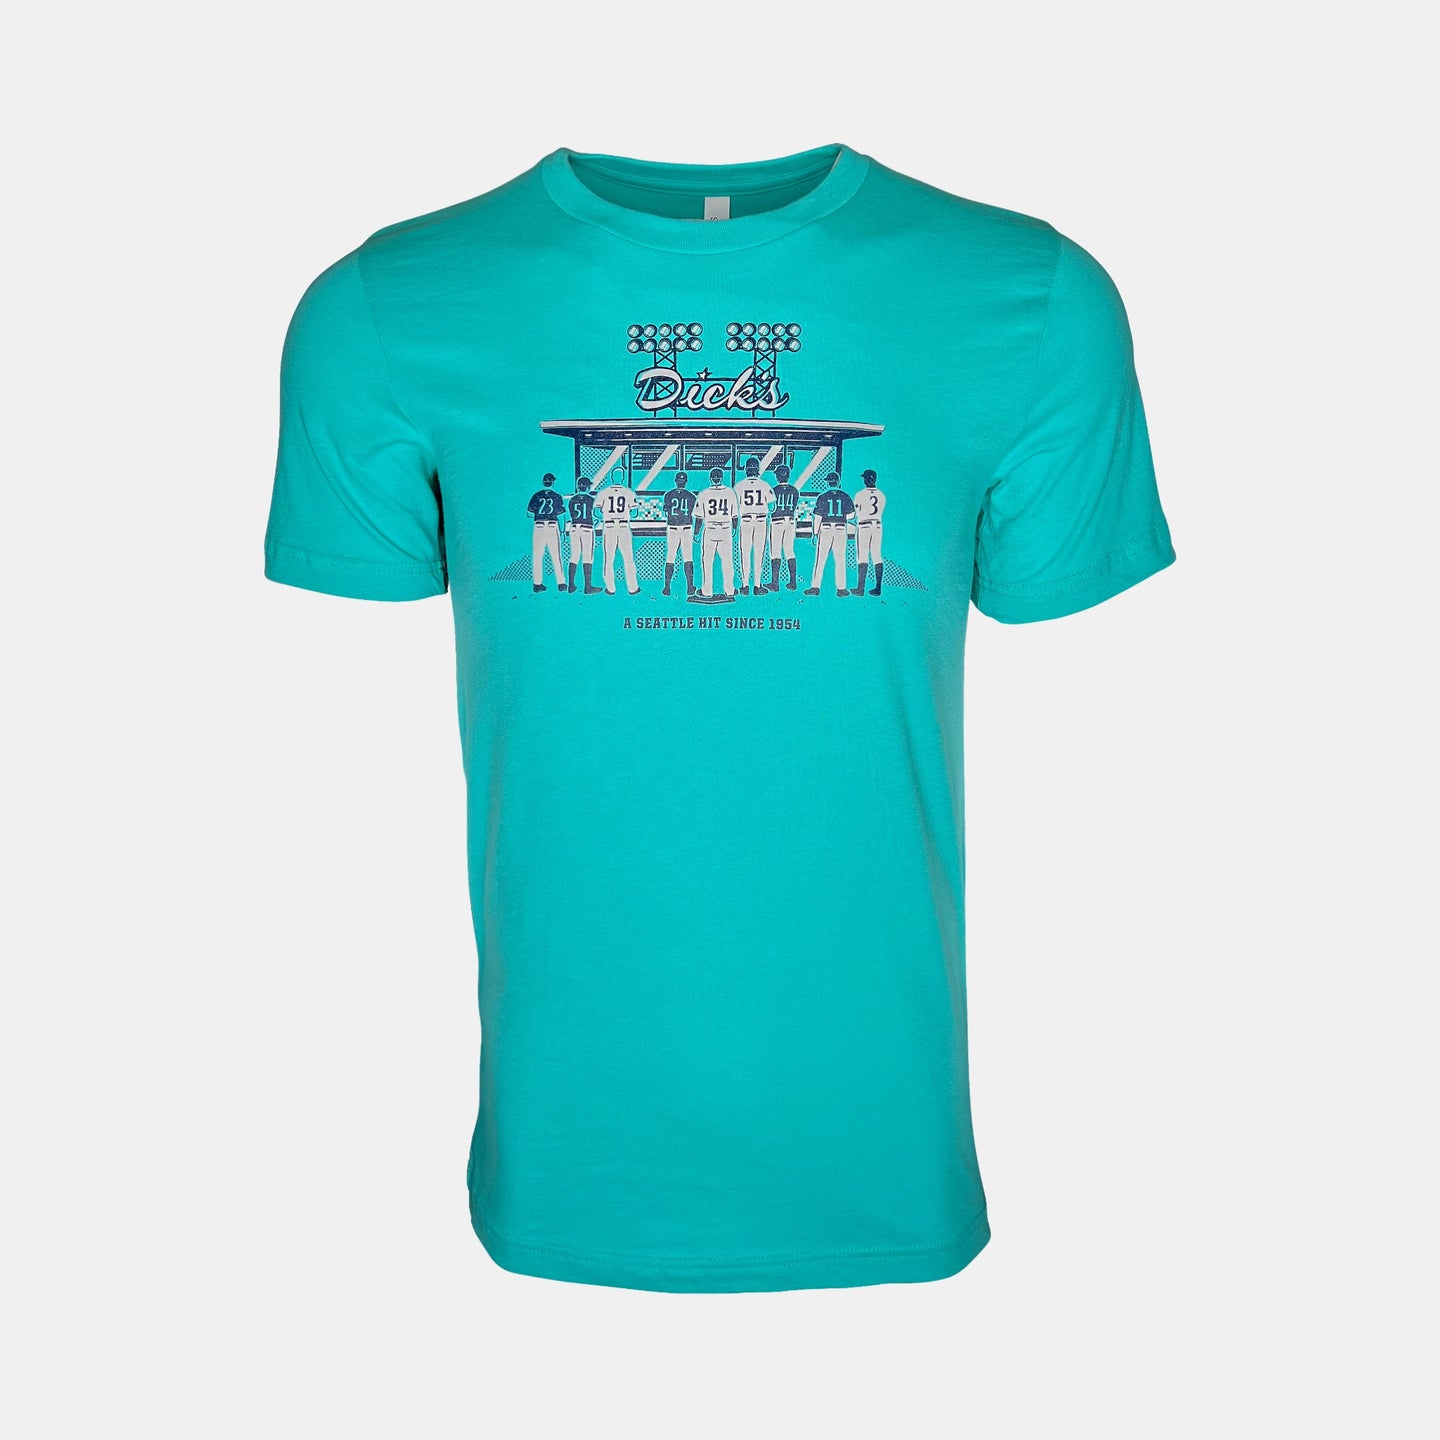 Teal t-shirt w/ navy/gray graphic of 9 baseball players facing the Dick's Drive-In window & A Seattle Hit Since 1954 tagline